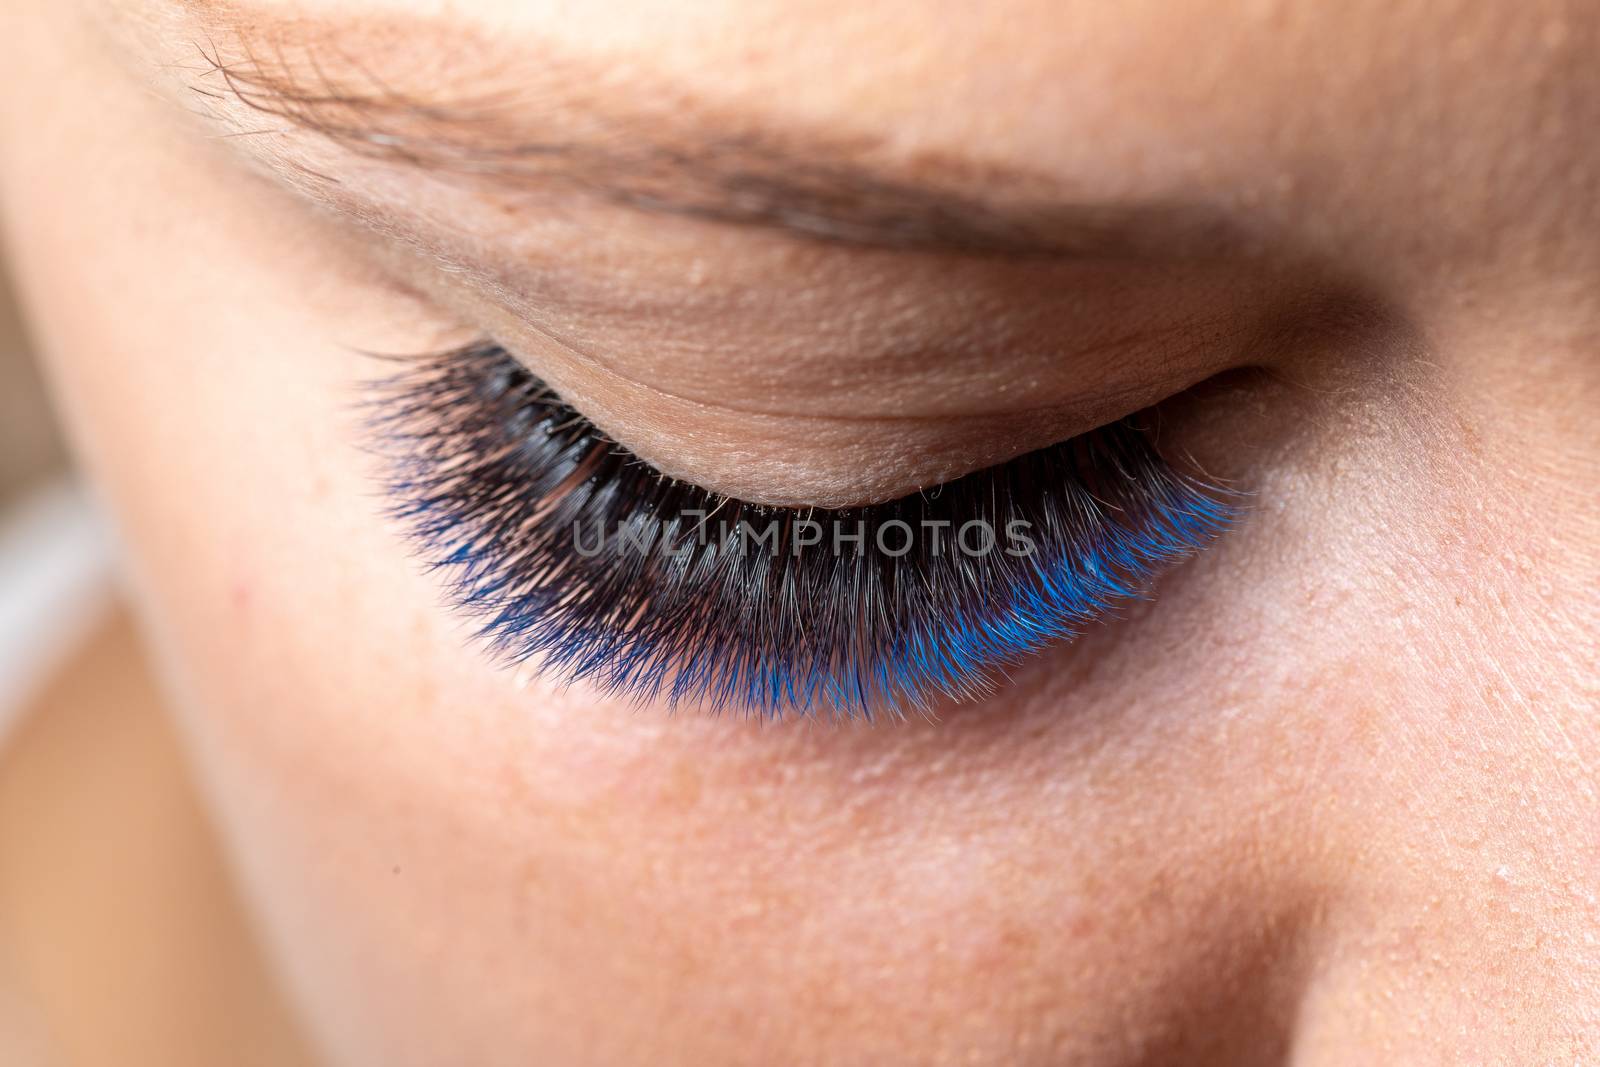 Blue Eyelash Extension with diferent colors lashes by adamr